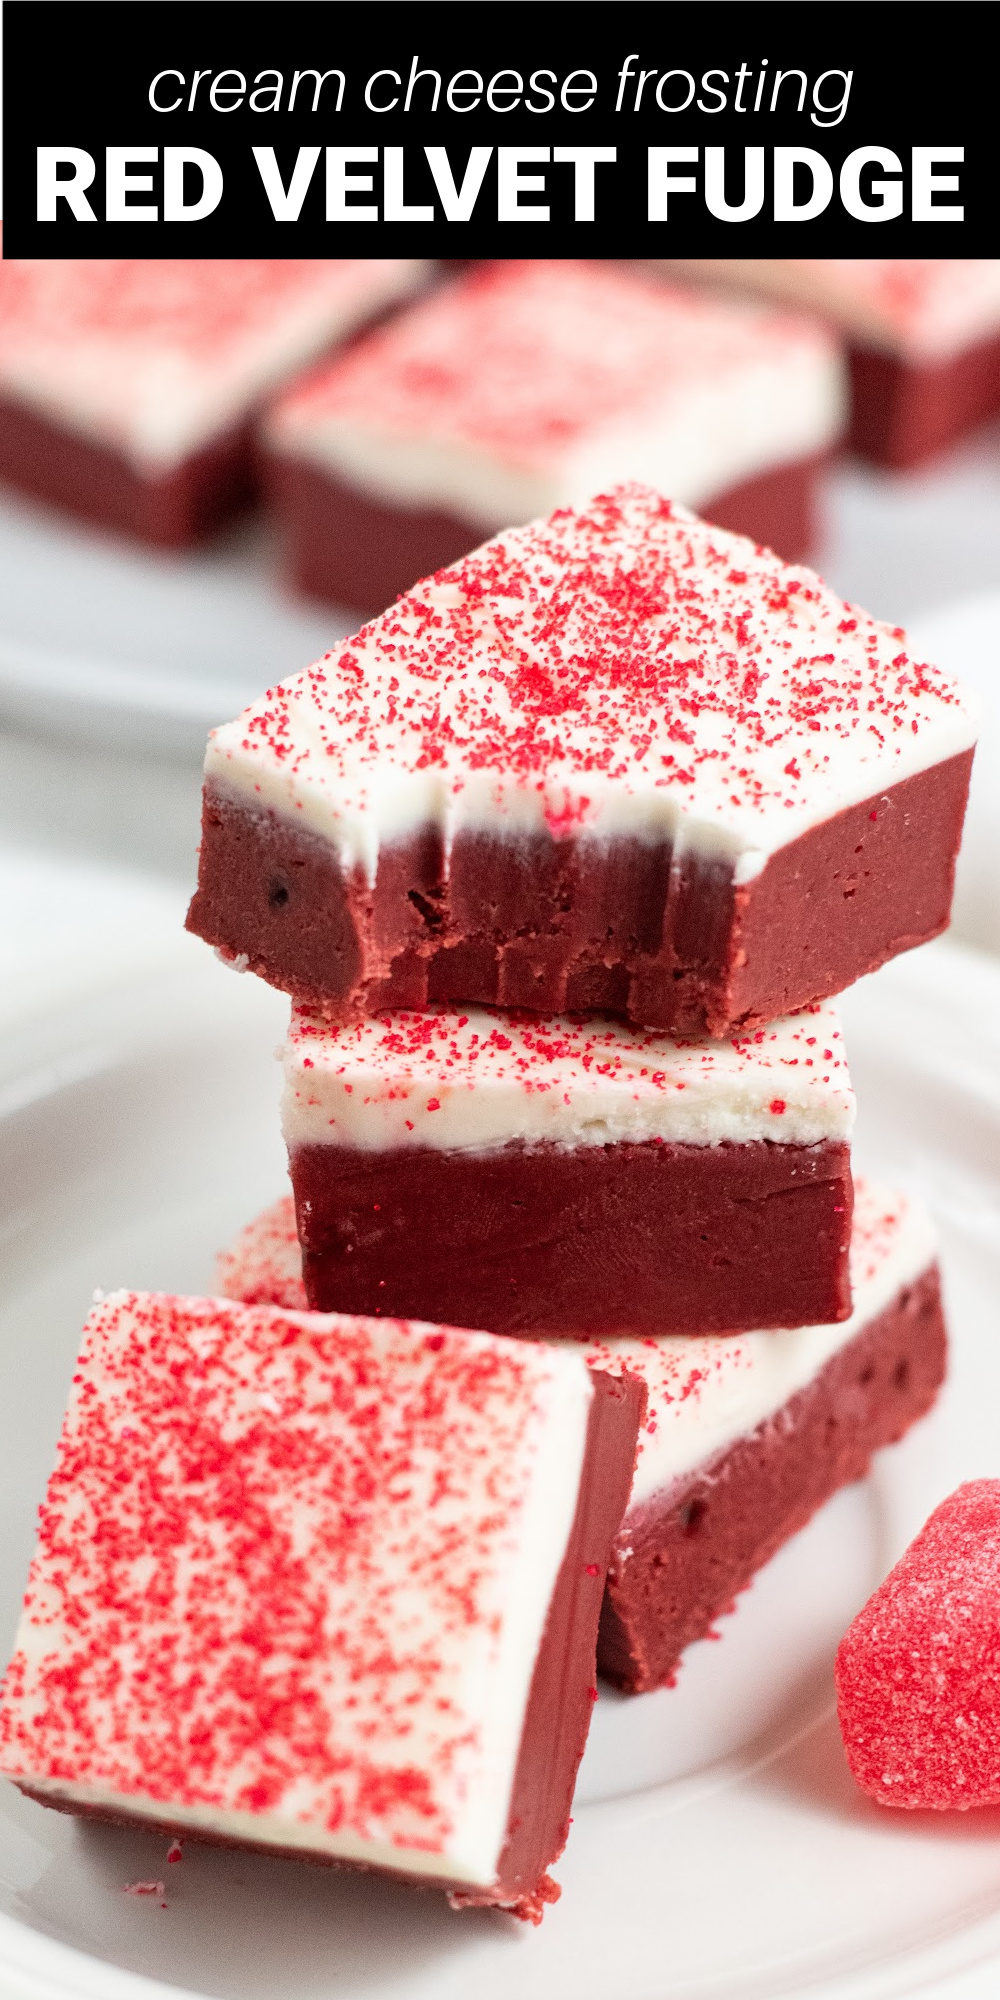 Fans of red velvet cake are going to absolutely love this easy Red Velvet Fudge recipe. It has a rich and creamy fudge layer, then it's topped with a sweet and decadent white chocolate and cream cheese layer.